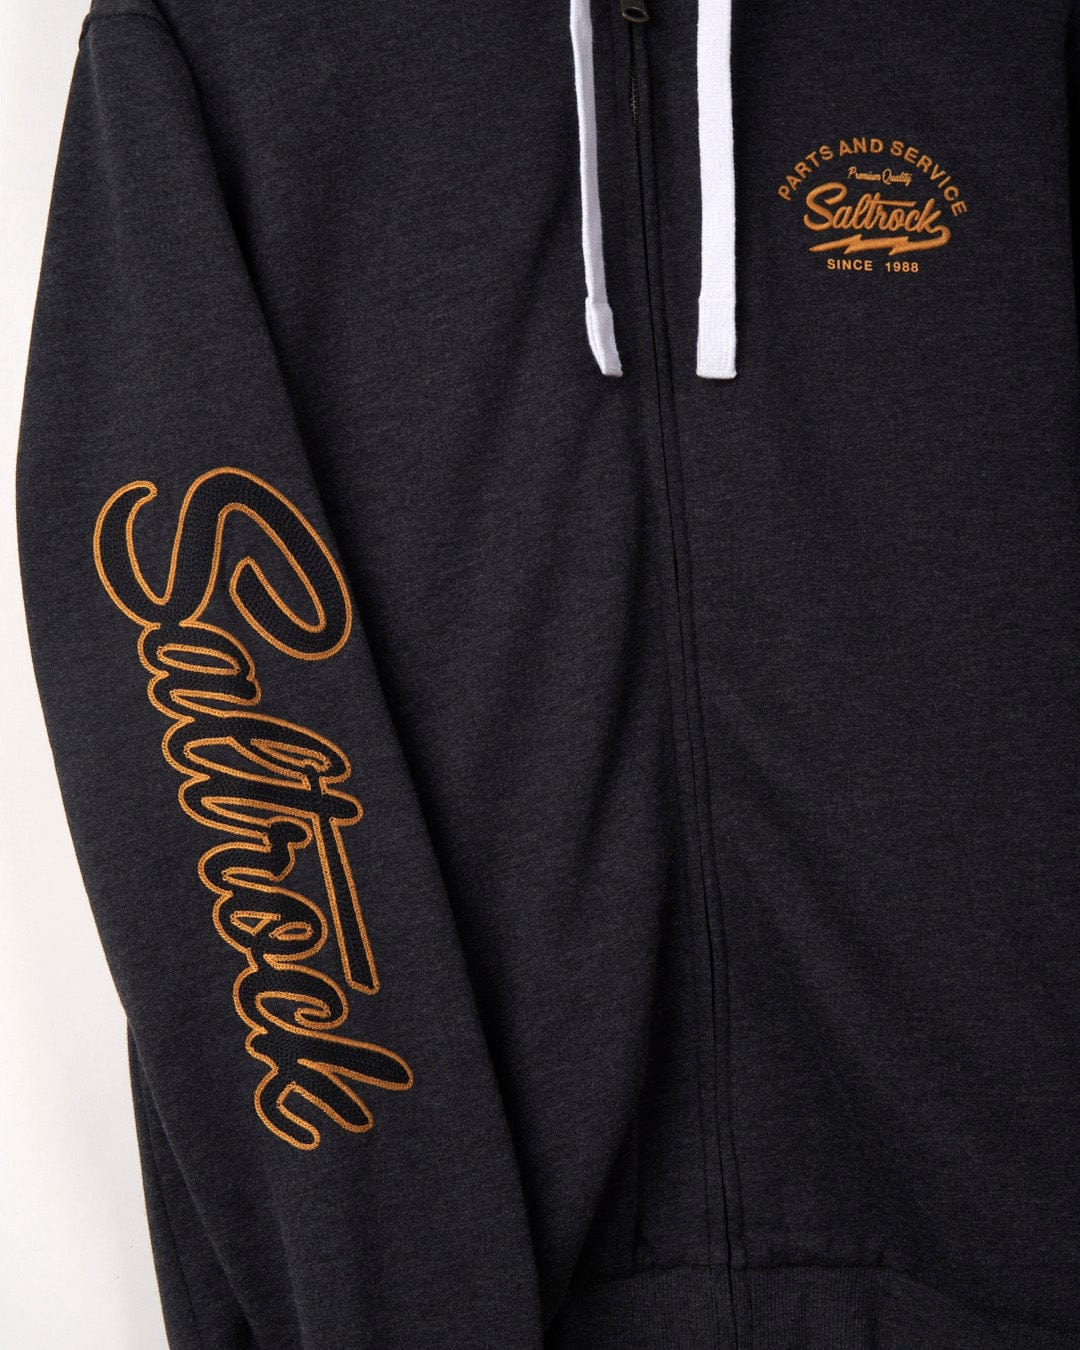 Close-up of a dark gray zip-up hoodie with the embroidered chain stitch logo "Saltrock" in yellow, and text "surf and service since 1988" on the left chest area.